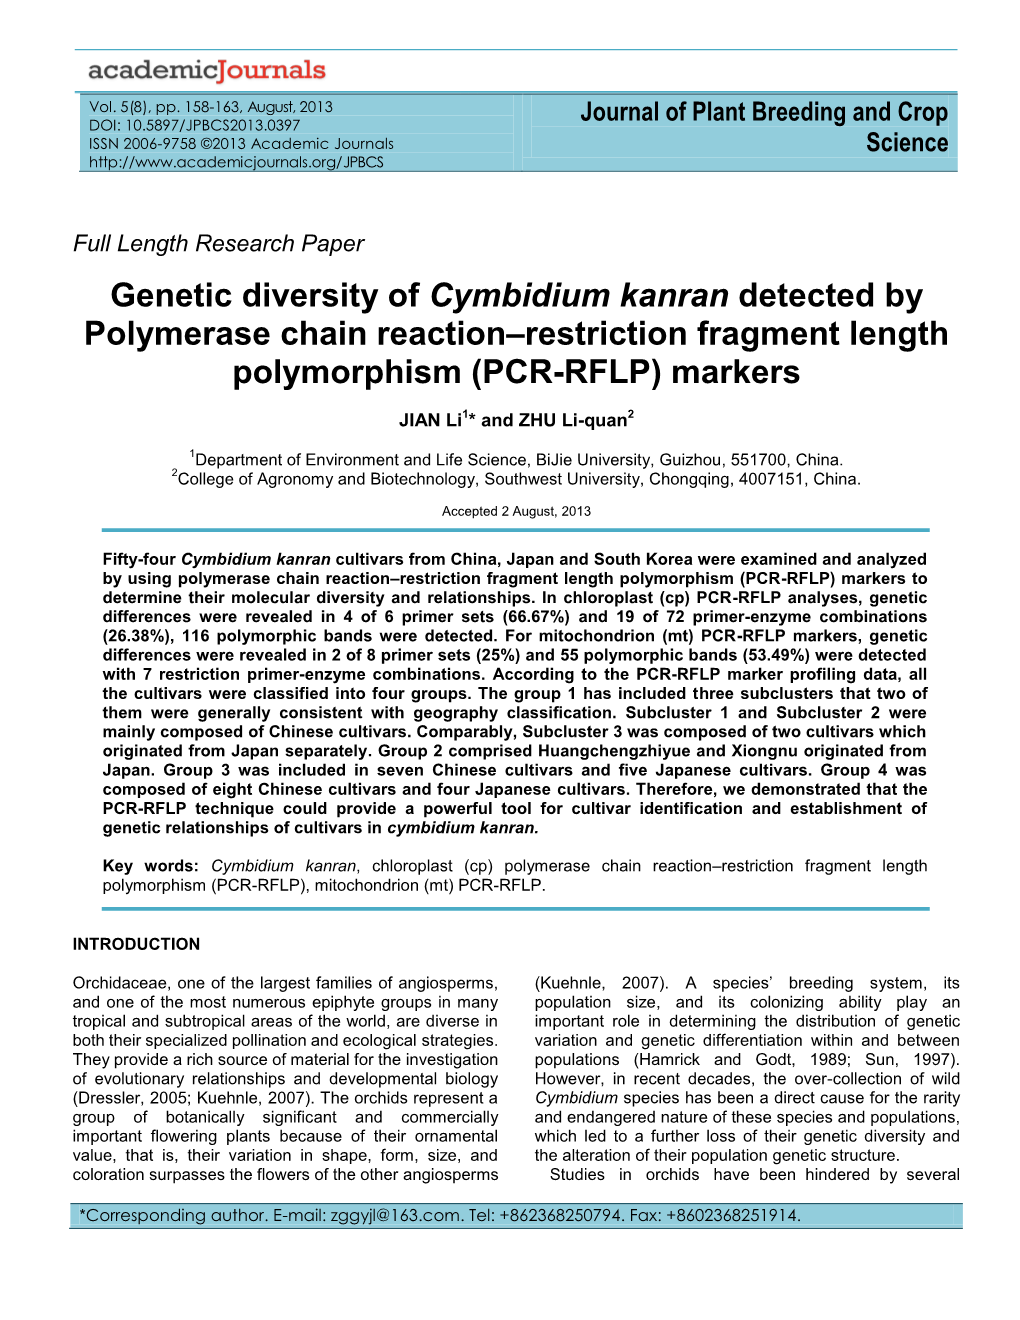 Genetic Diversity of Cymbidium Kanran Detected by Polymerase Chain Reaction–Restriction Fragment Length Polymorphism (PCR-RFLP) Markers